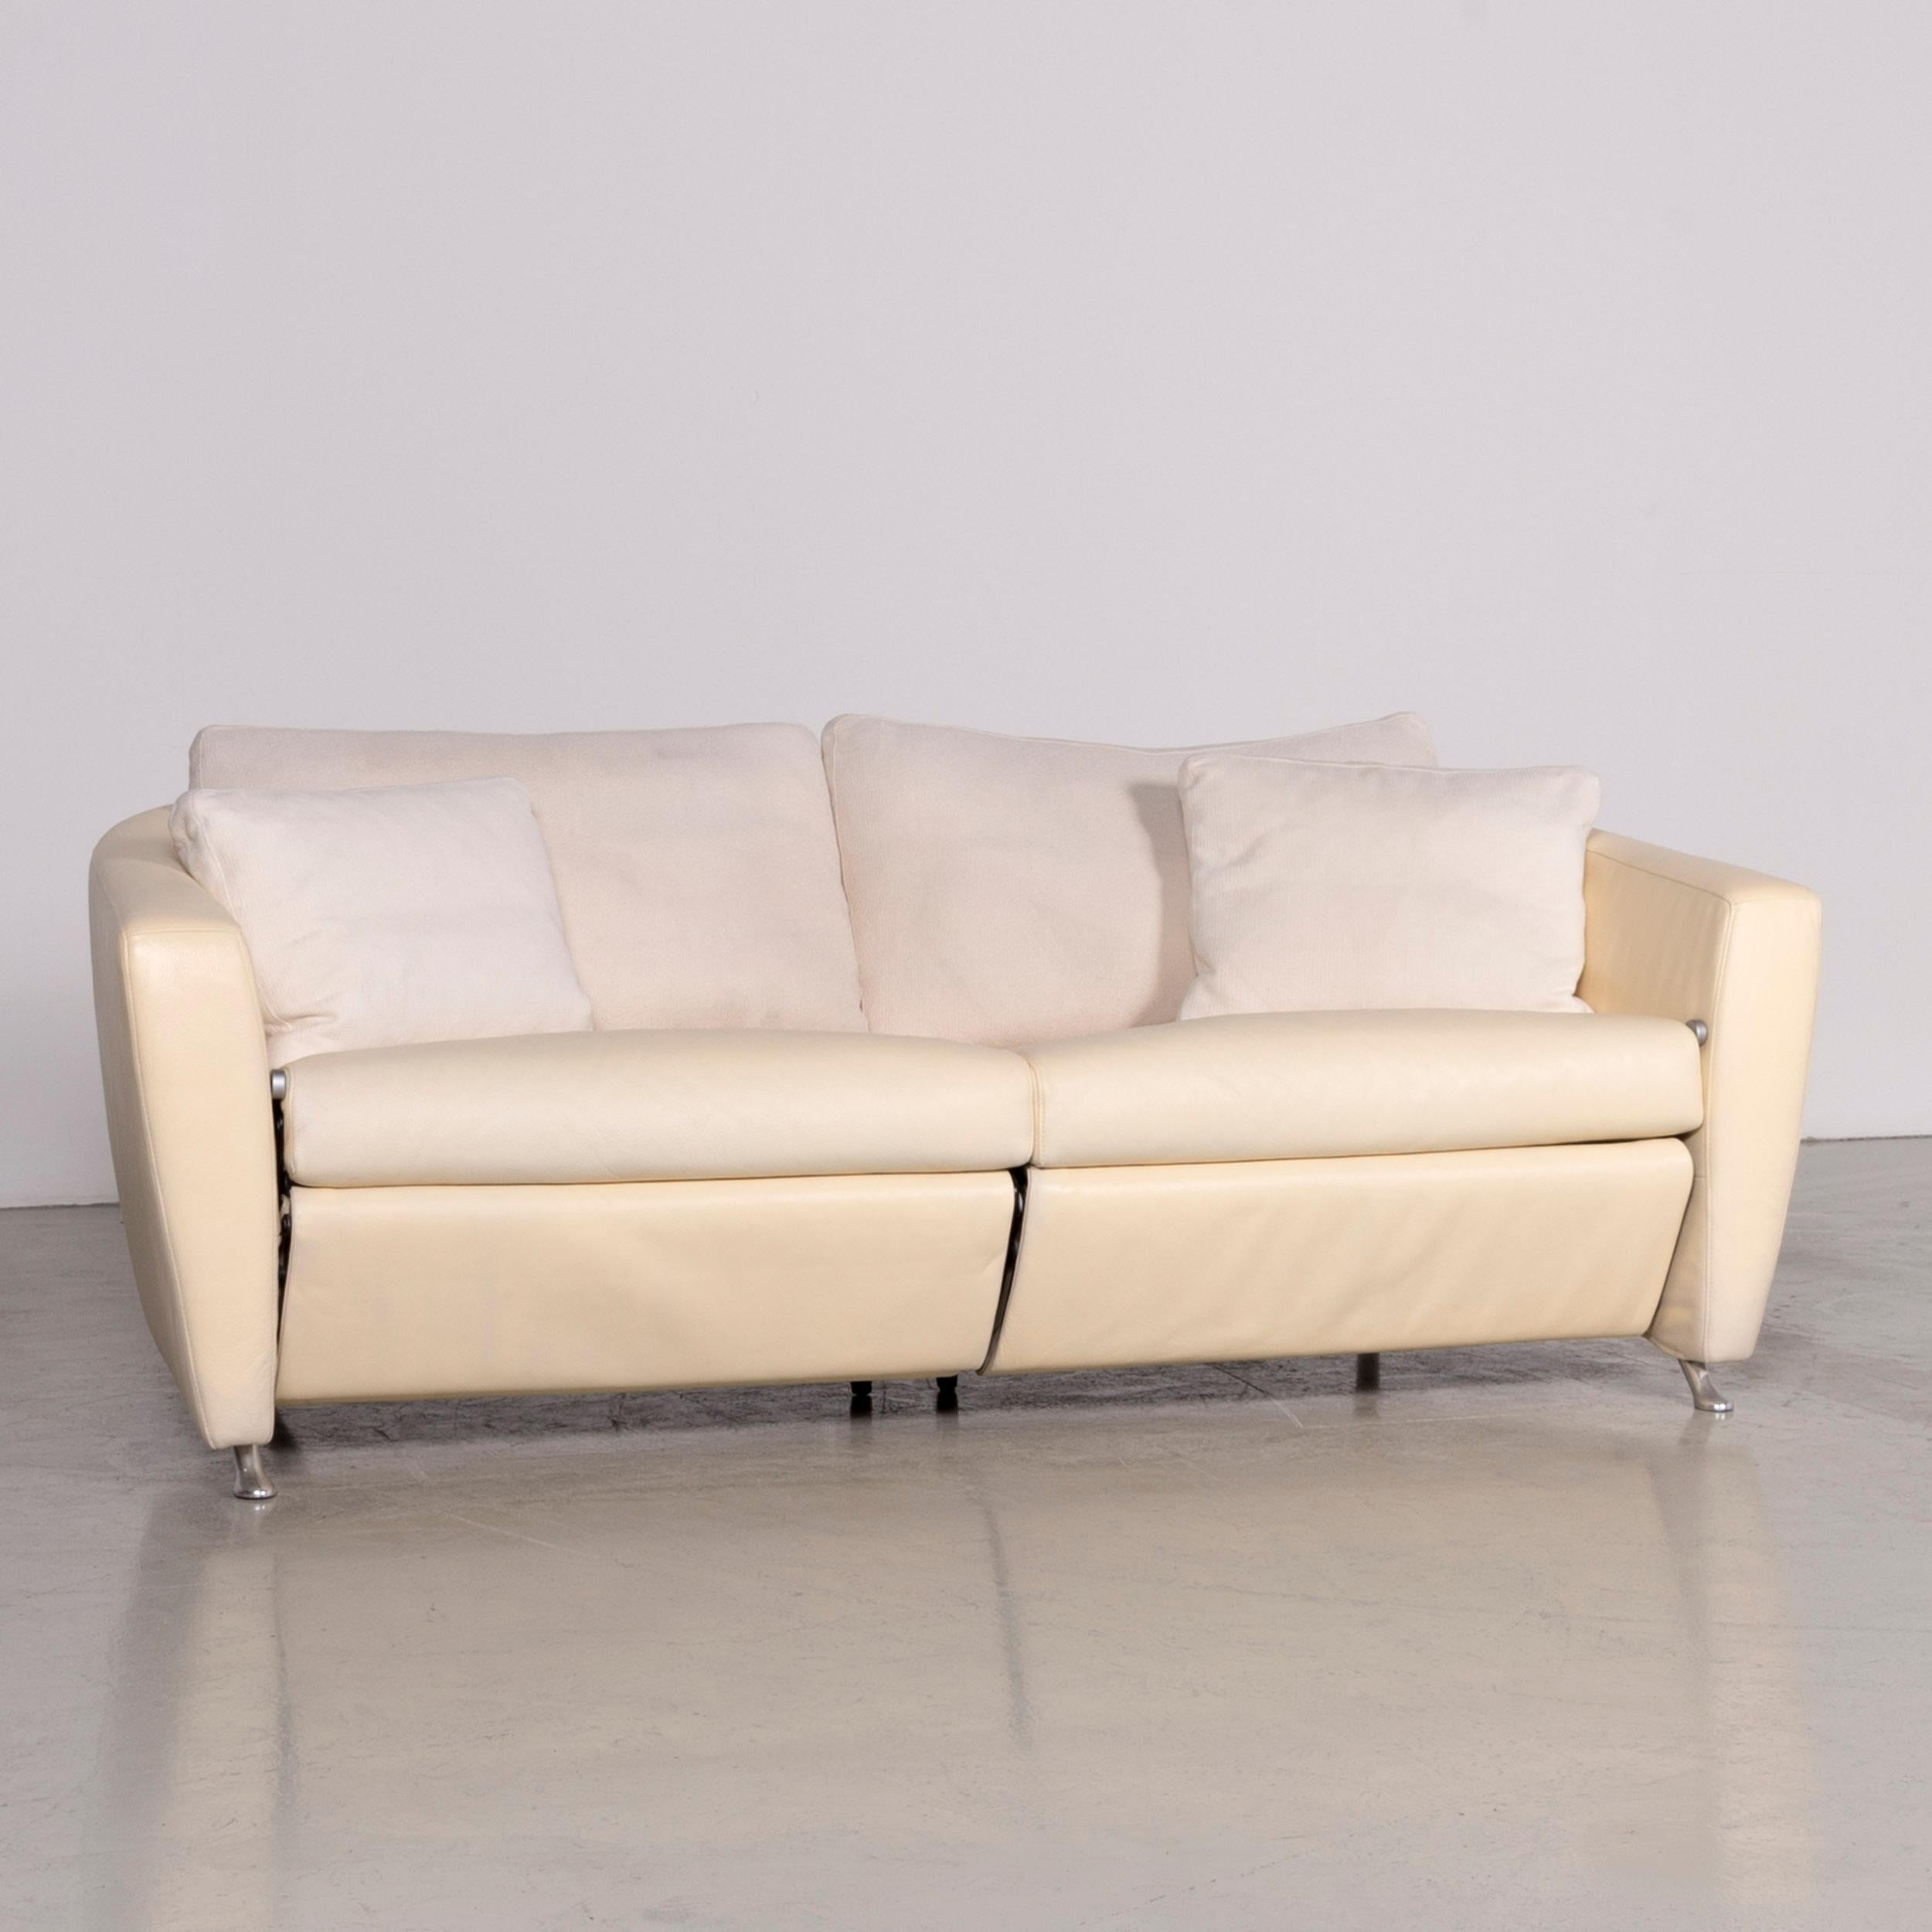 Modern FSM Sesam Leather Sofa Off-White Two-Seat Function For Sale